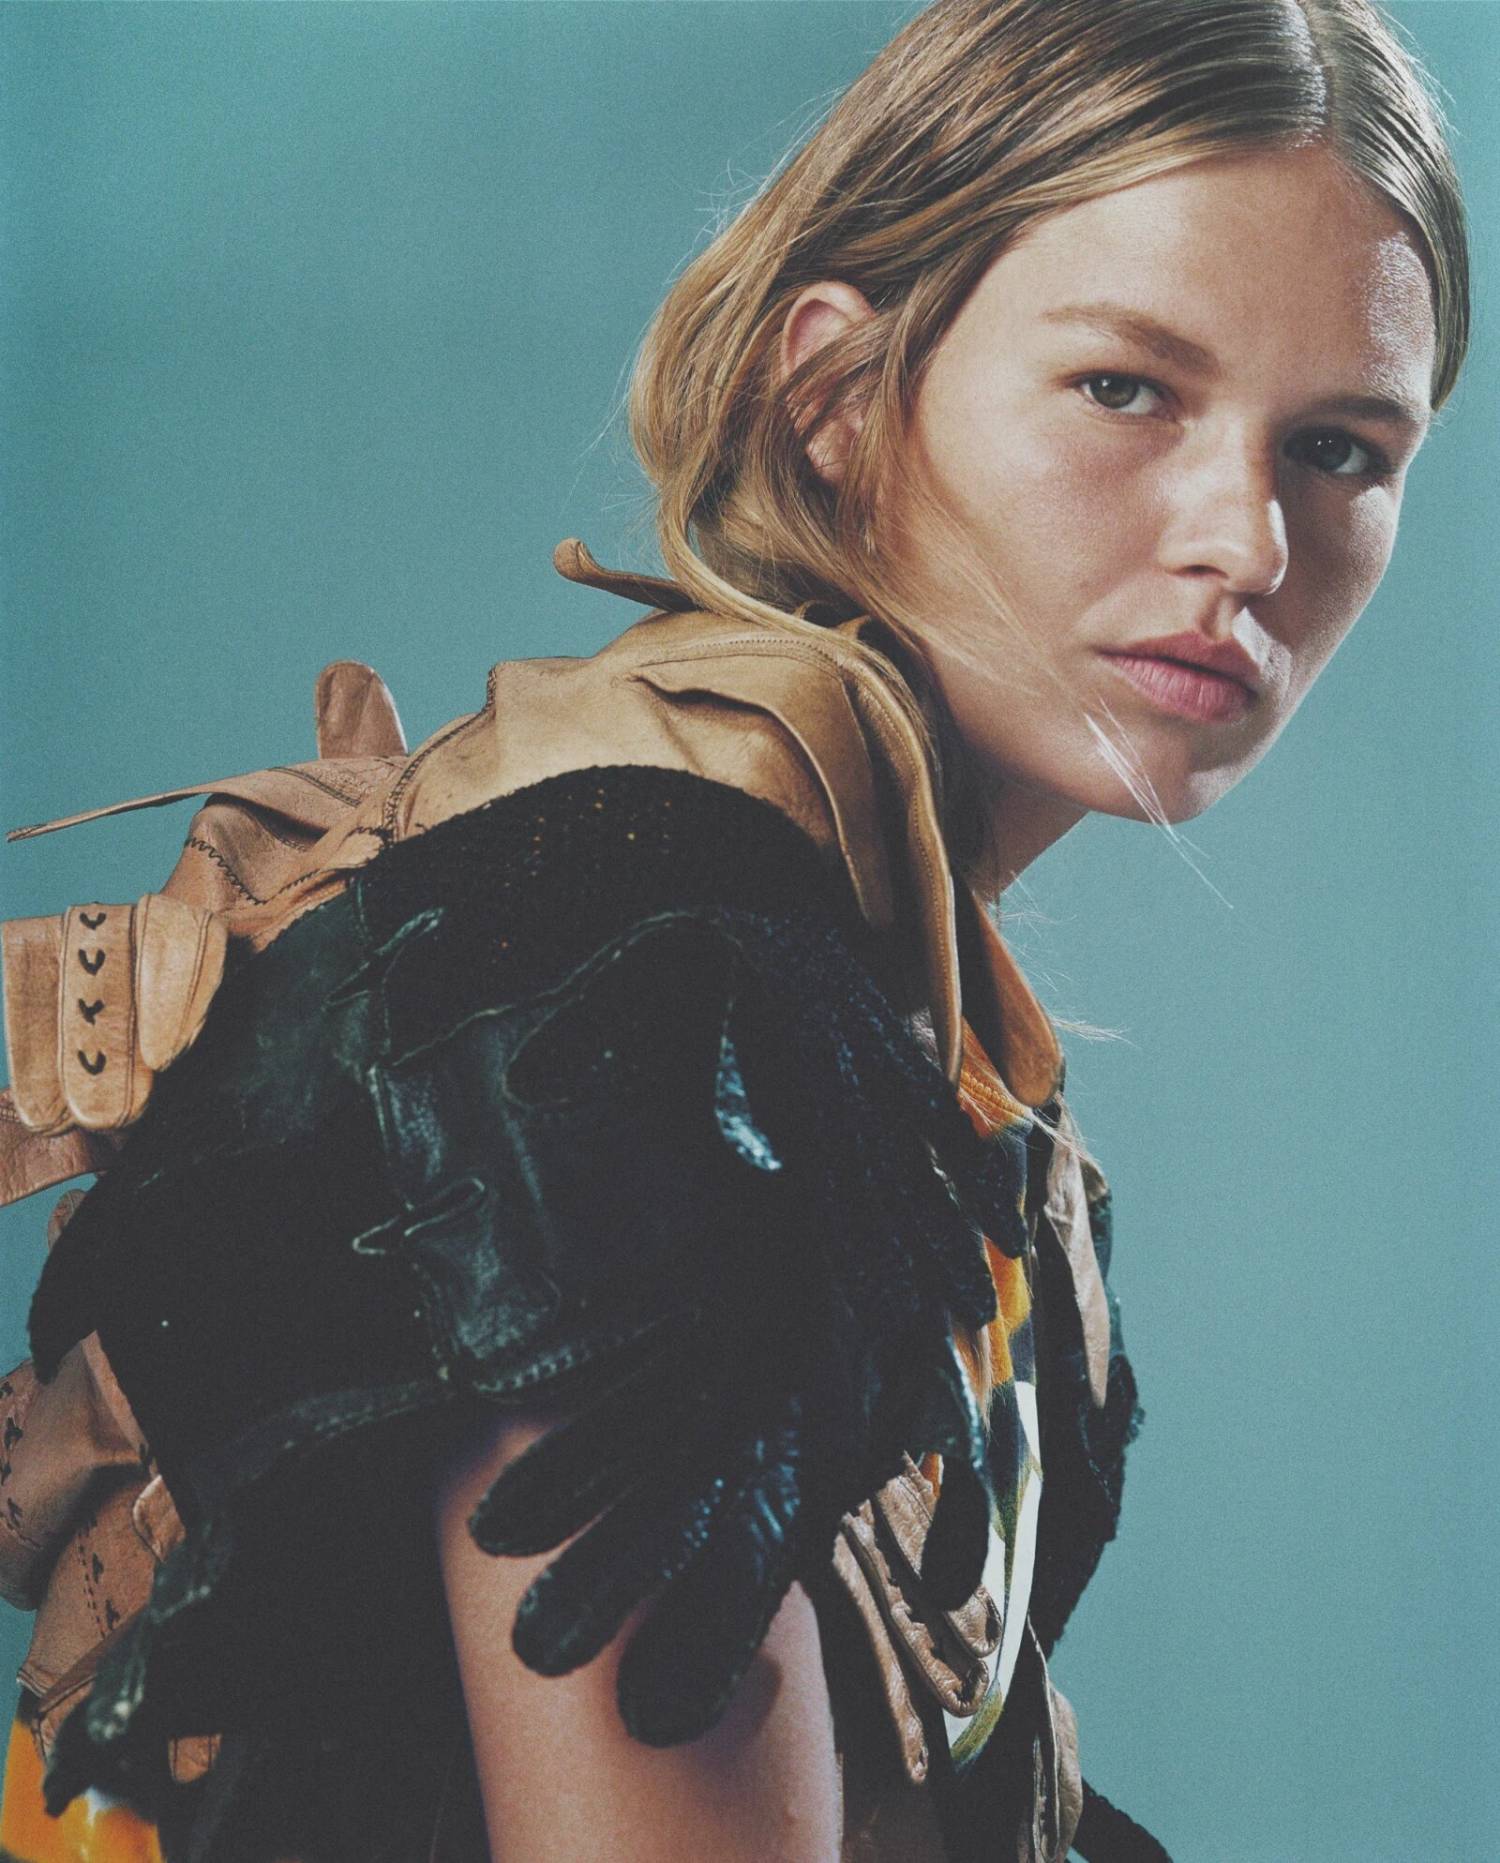 The Berlin Issue: Anna Ewers by Thue Norgaard for Holiday Magazine Fall-Winter 2021